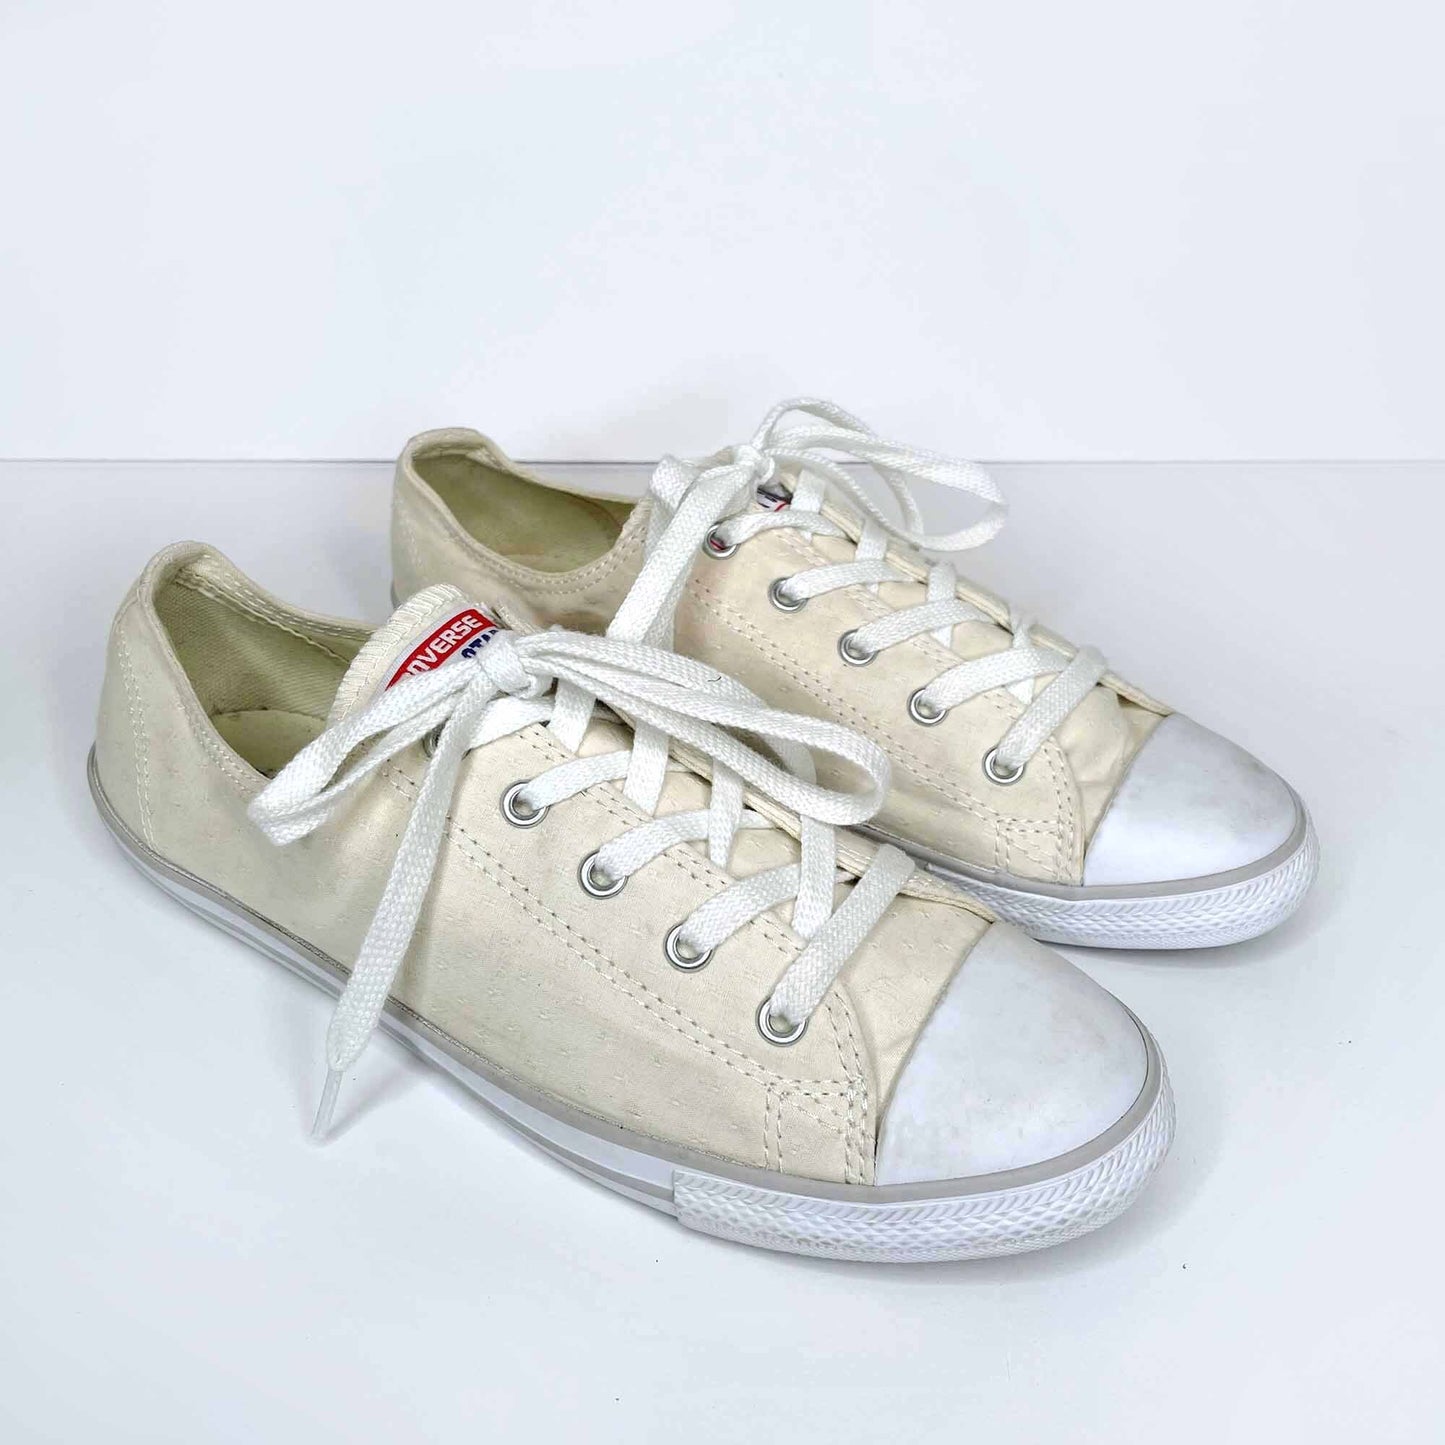 converse cream eyelet low top sneakers - size 9